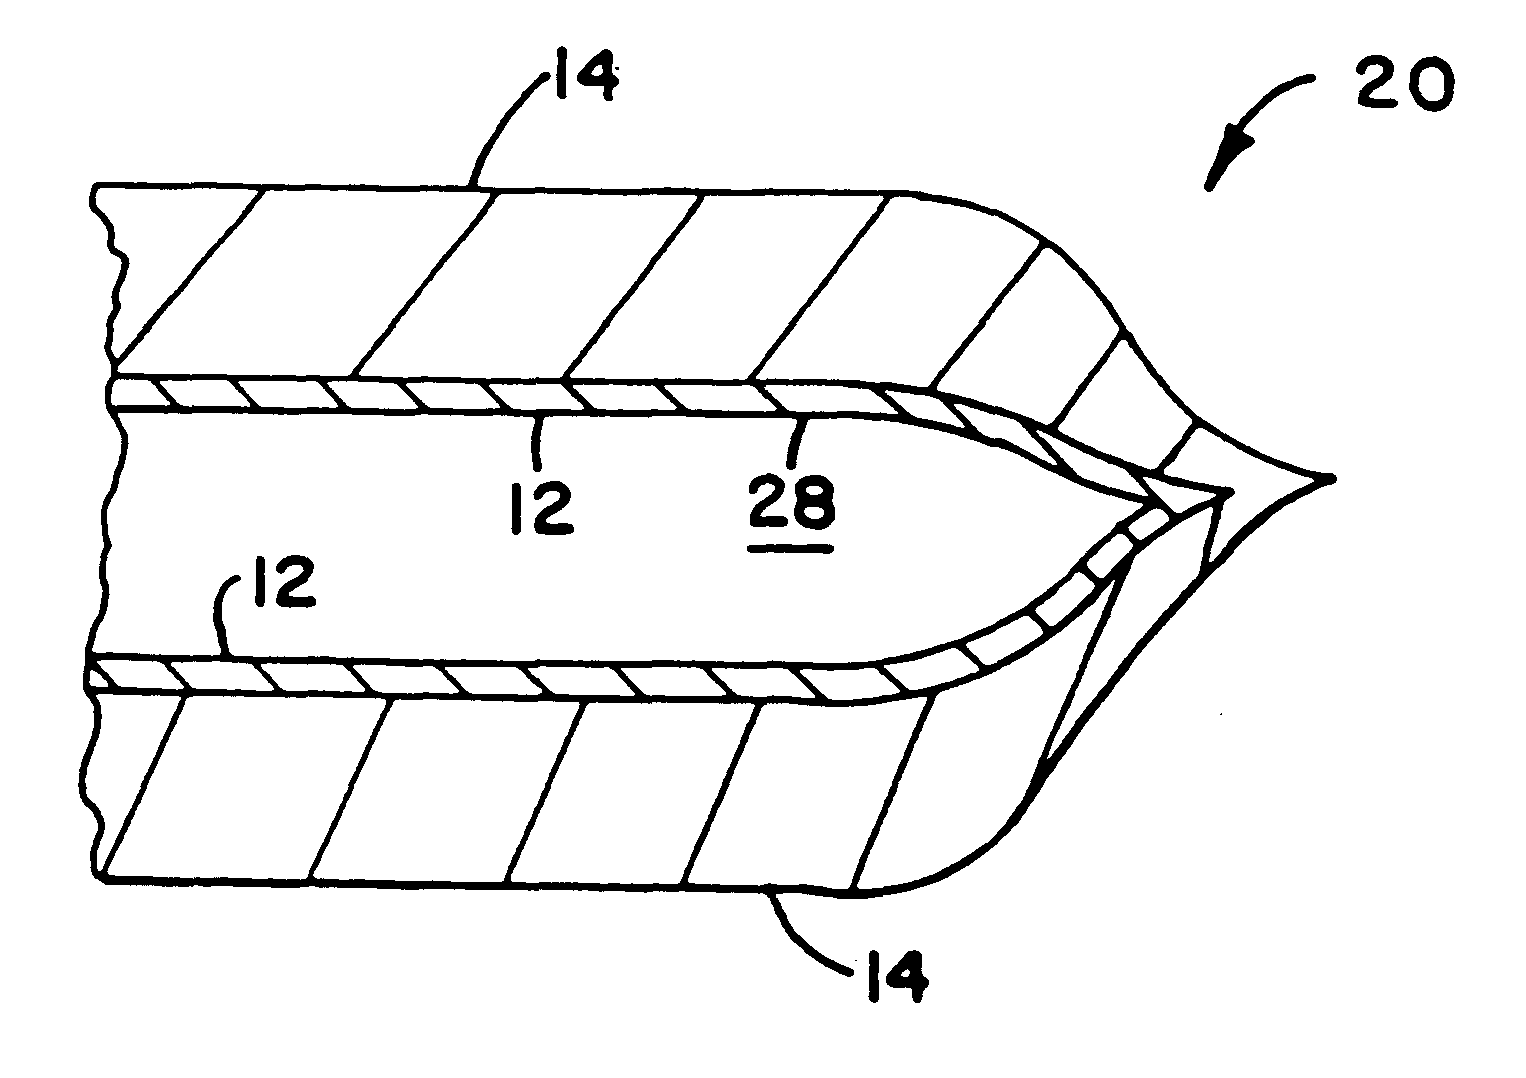 Multilayer gas-permeable container for the culture of adherent and non-adherent cells